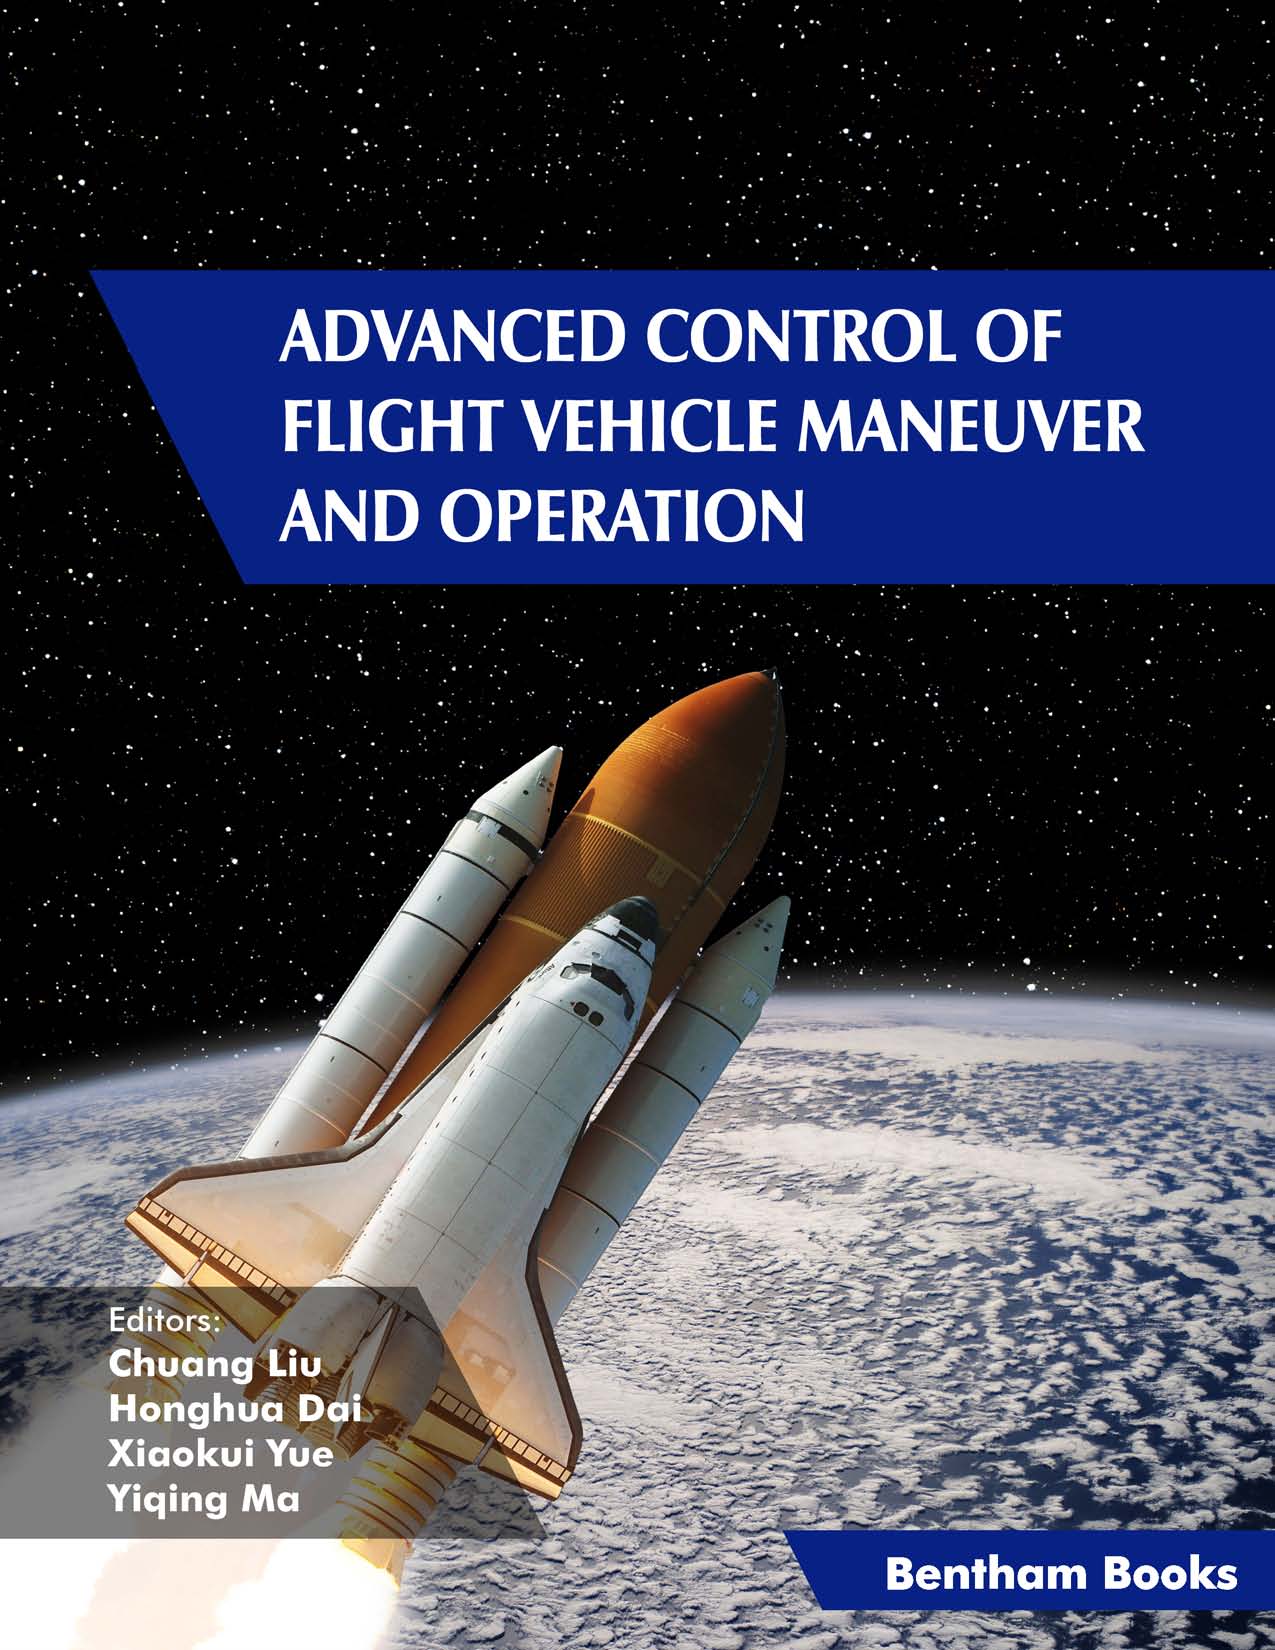 Advanced Control of Flight Vehicle Maneuver and Operation